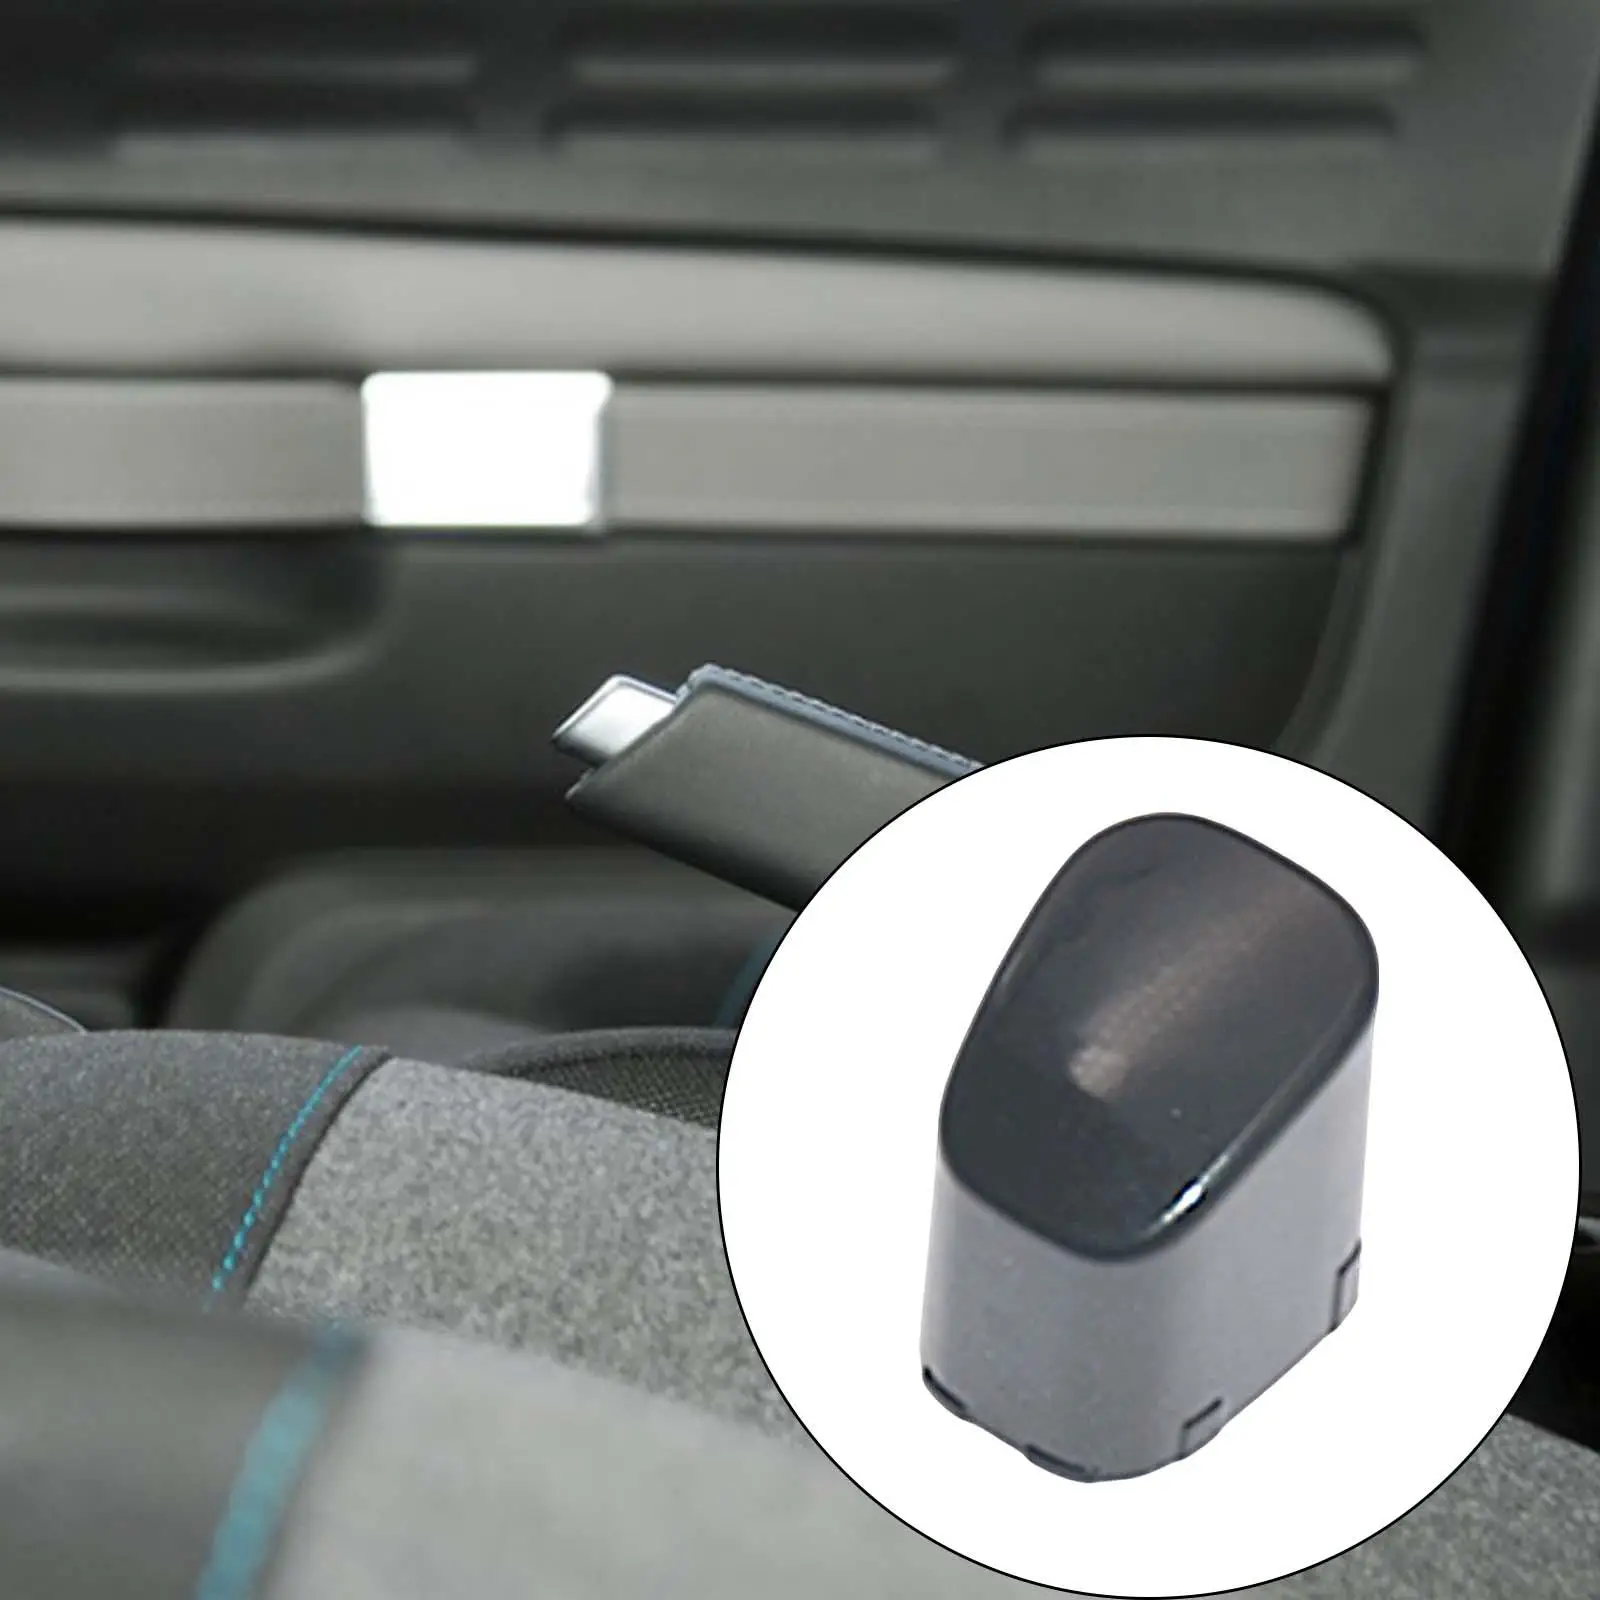 6RD711333A Car Styling Accessories Car Interior Hand Brake Button Trim Cover for Volkswagen polo Spare Parts